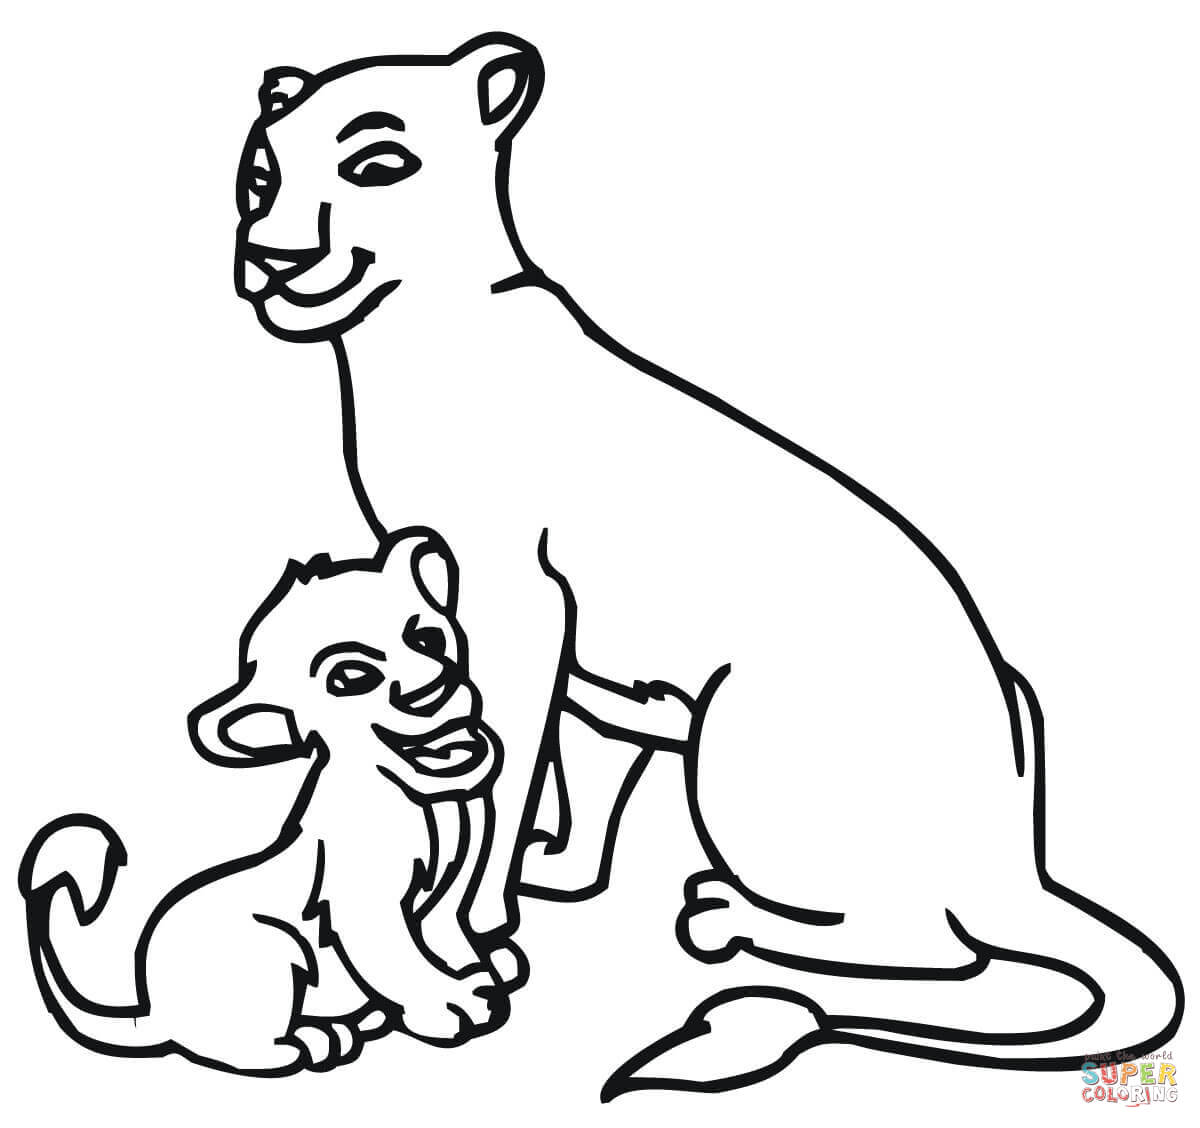 Baby Lion and Lioness coloring page | Free Printable Coloring Pages